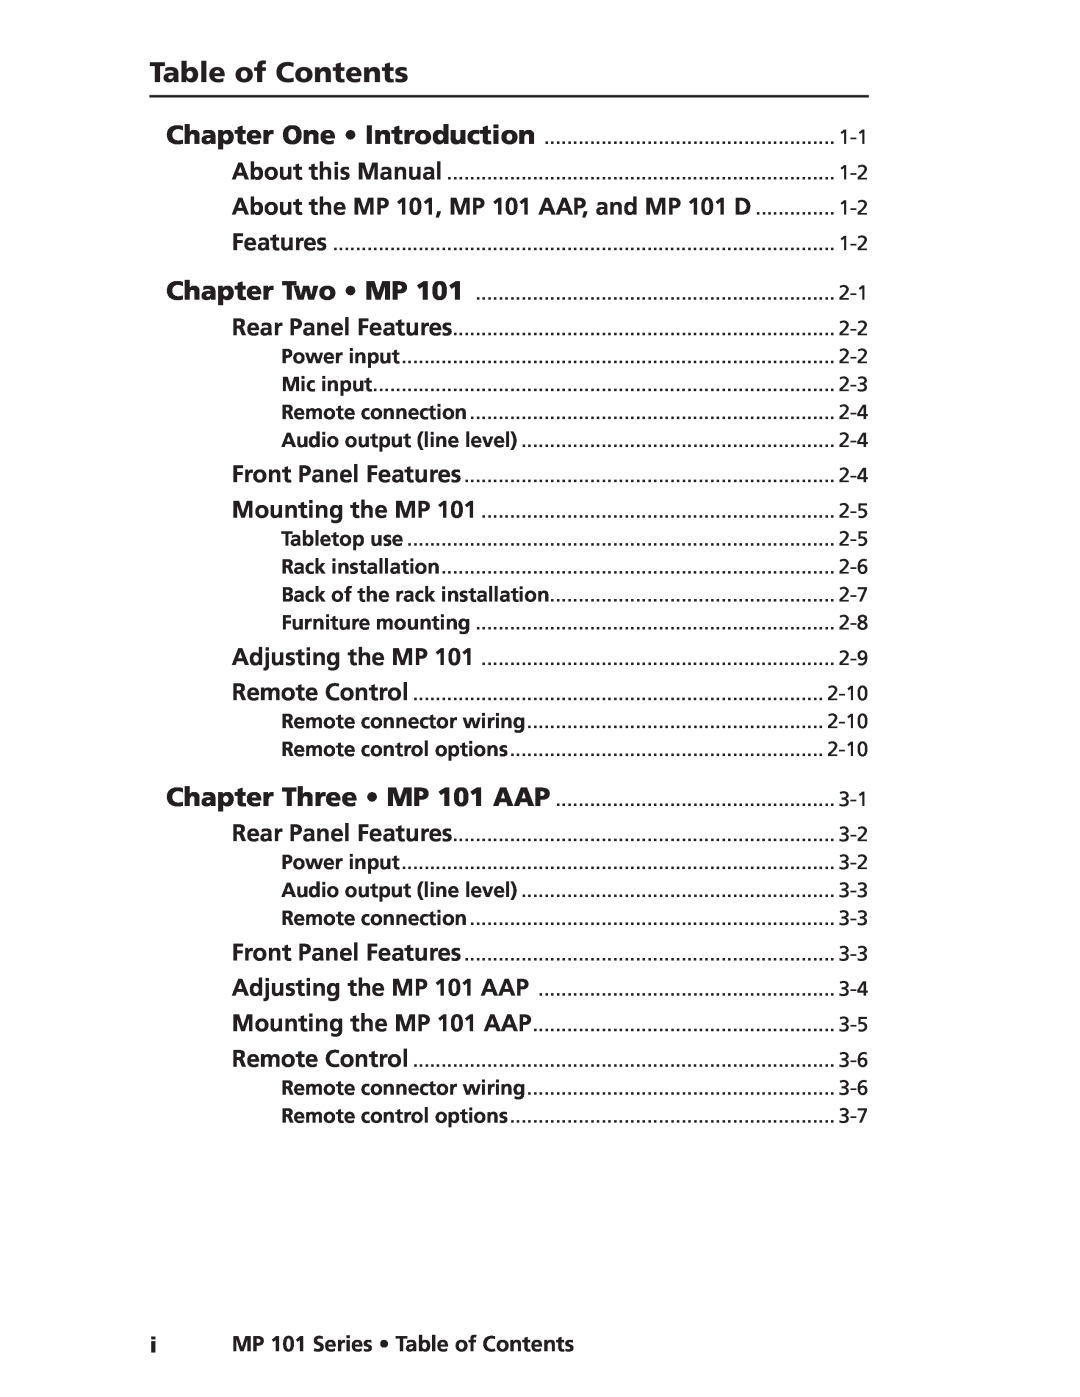 Extron electronic user manual About the MP 101, MP 101 AAP, and MP 101 D, iMP 101 Series Table of Contents 